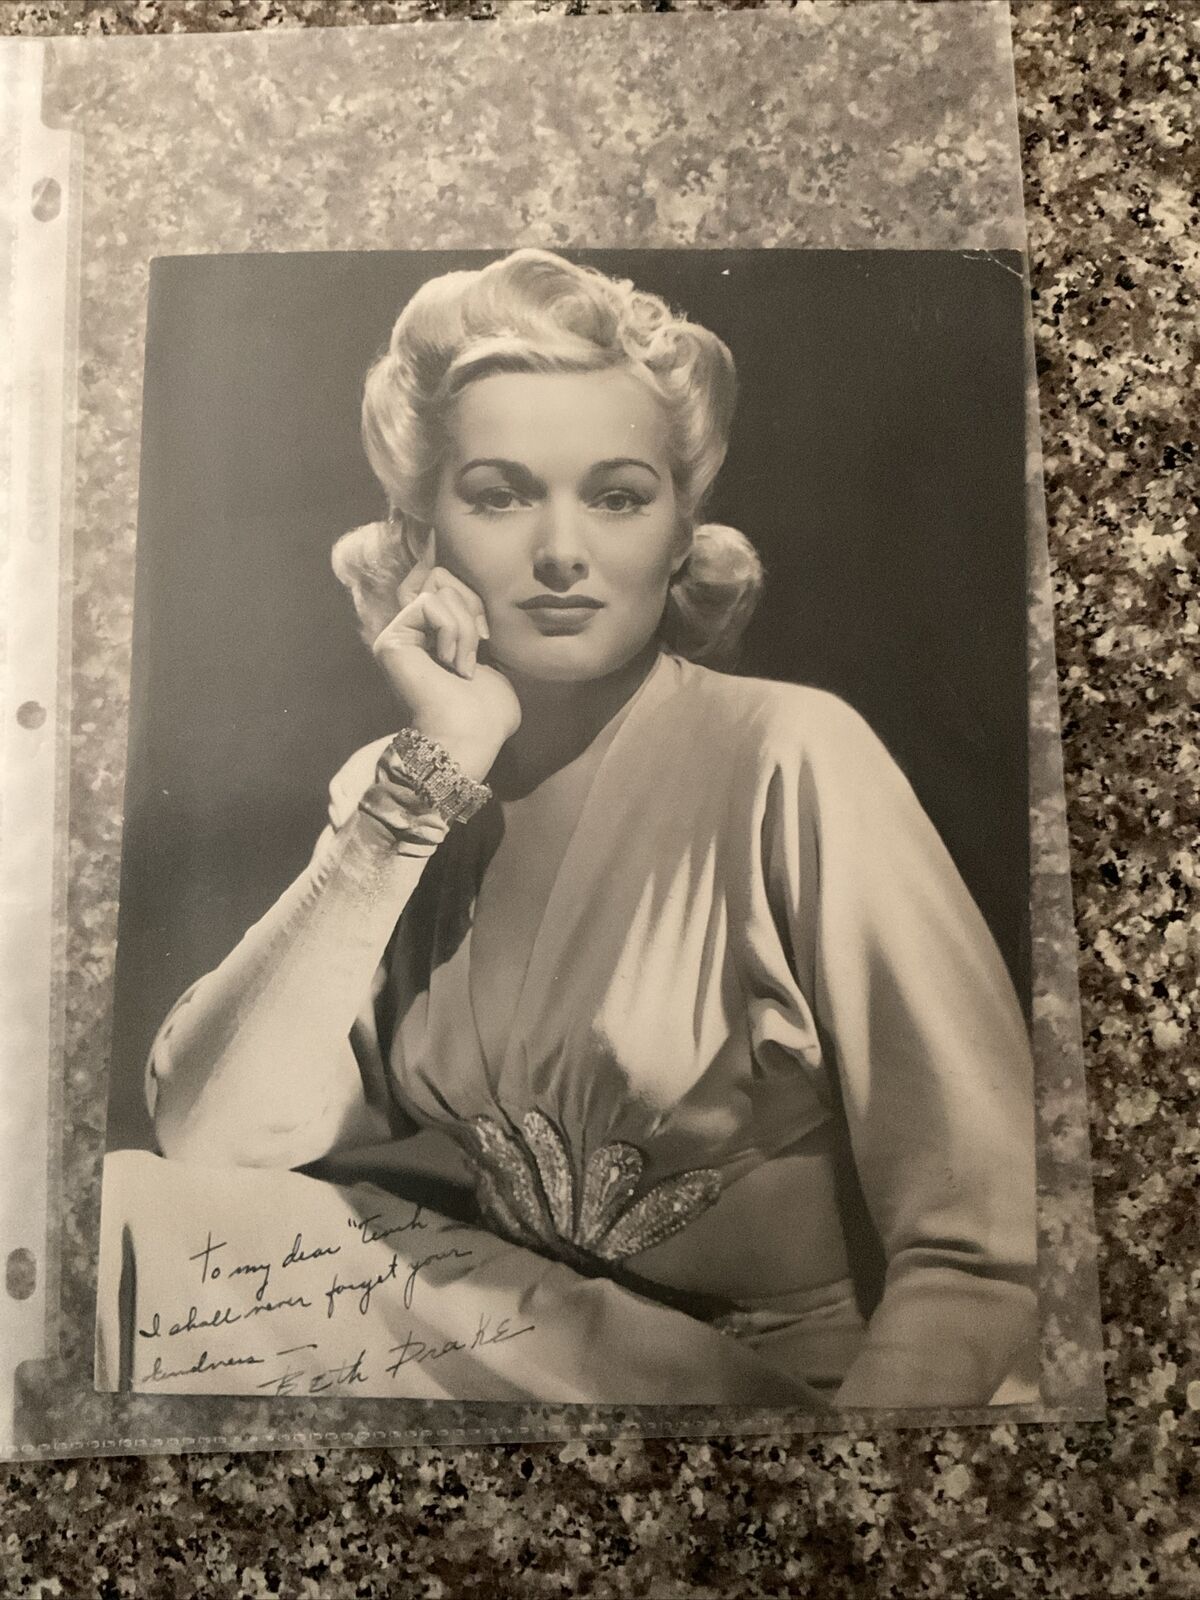 1940’s Actress Beth Drake W/ Signature And Inscription.